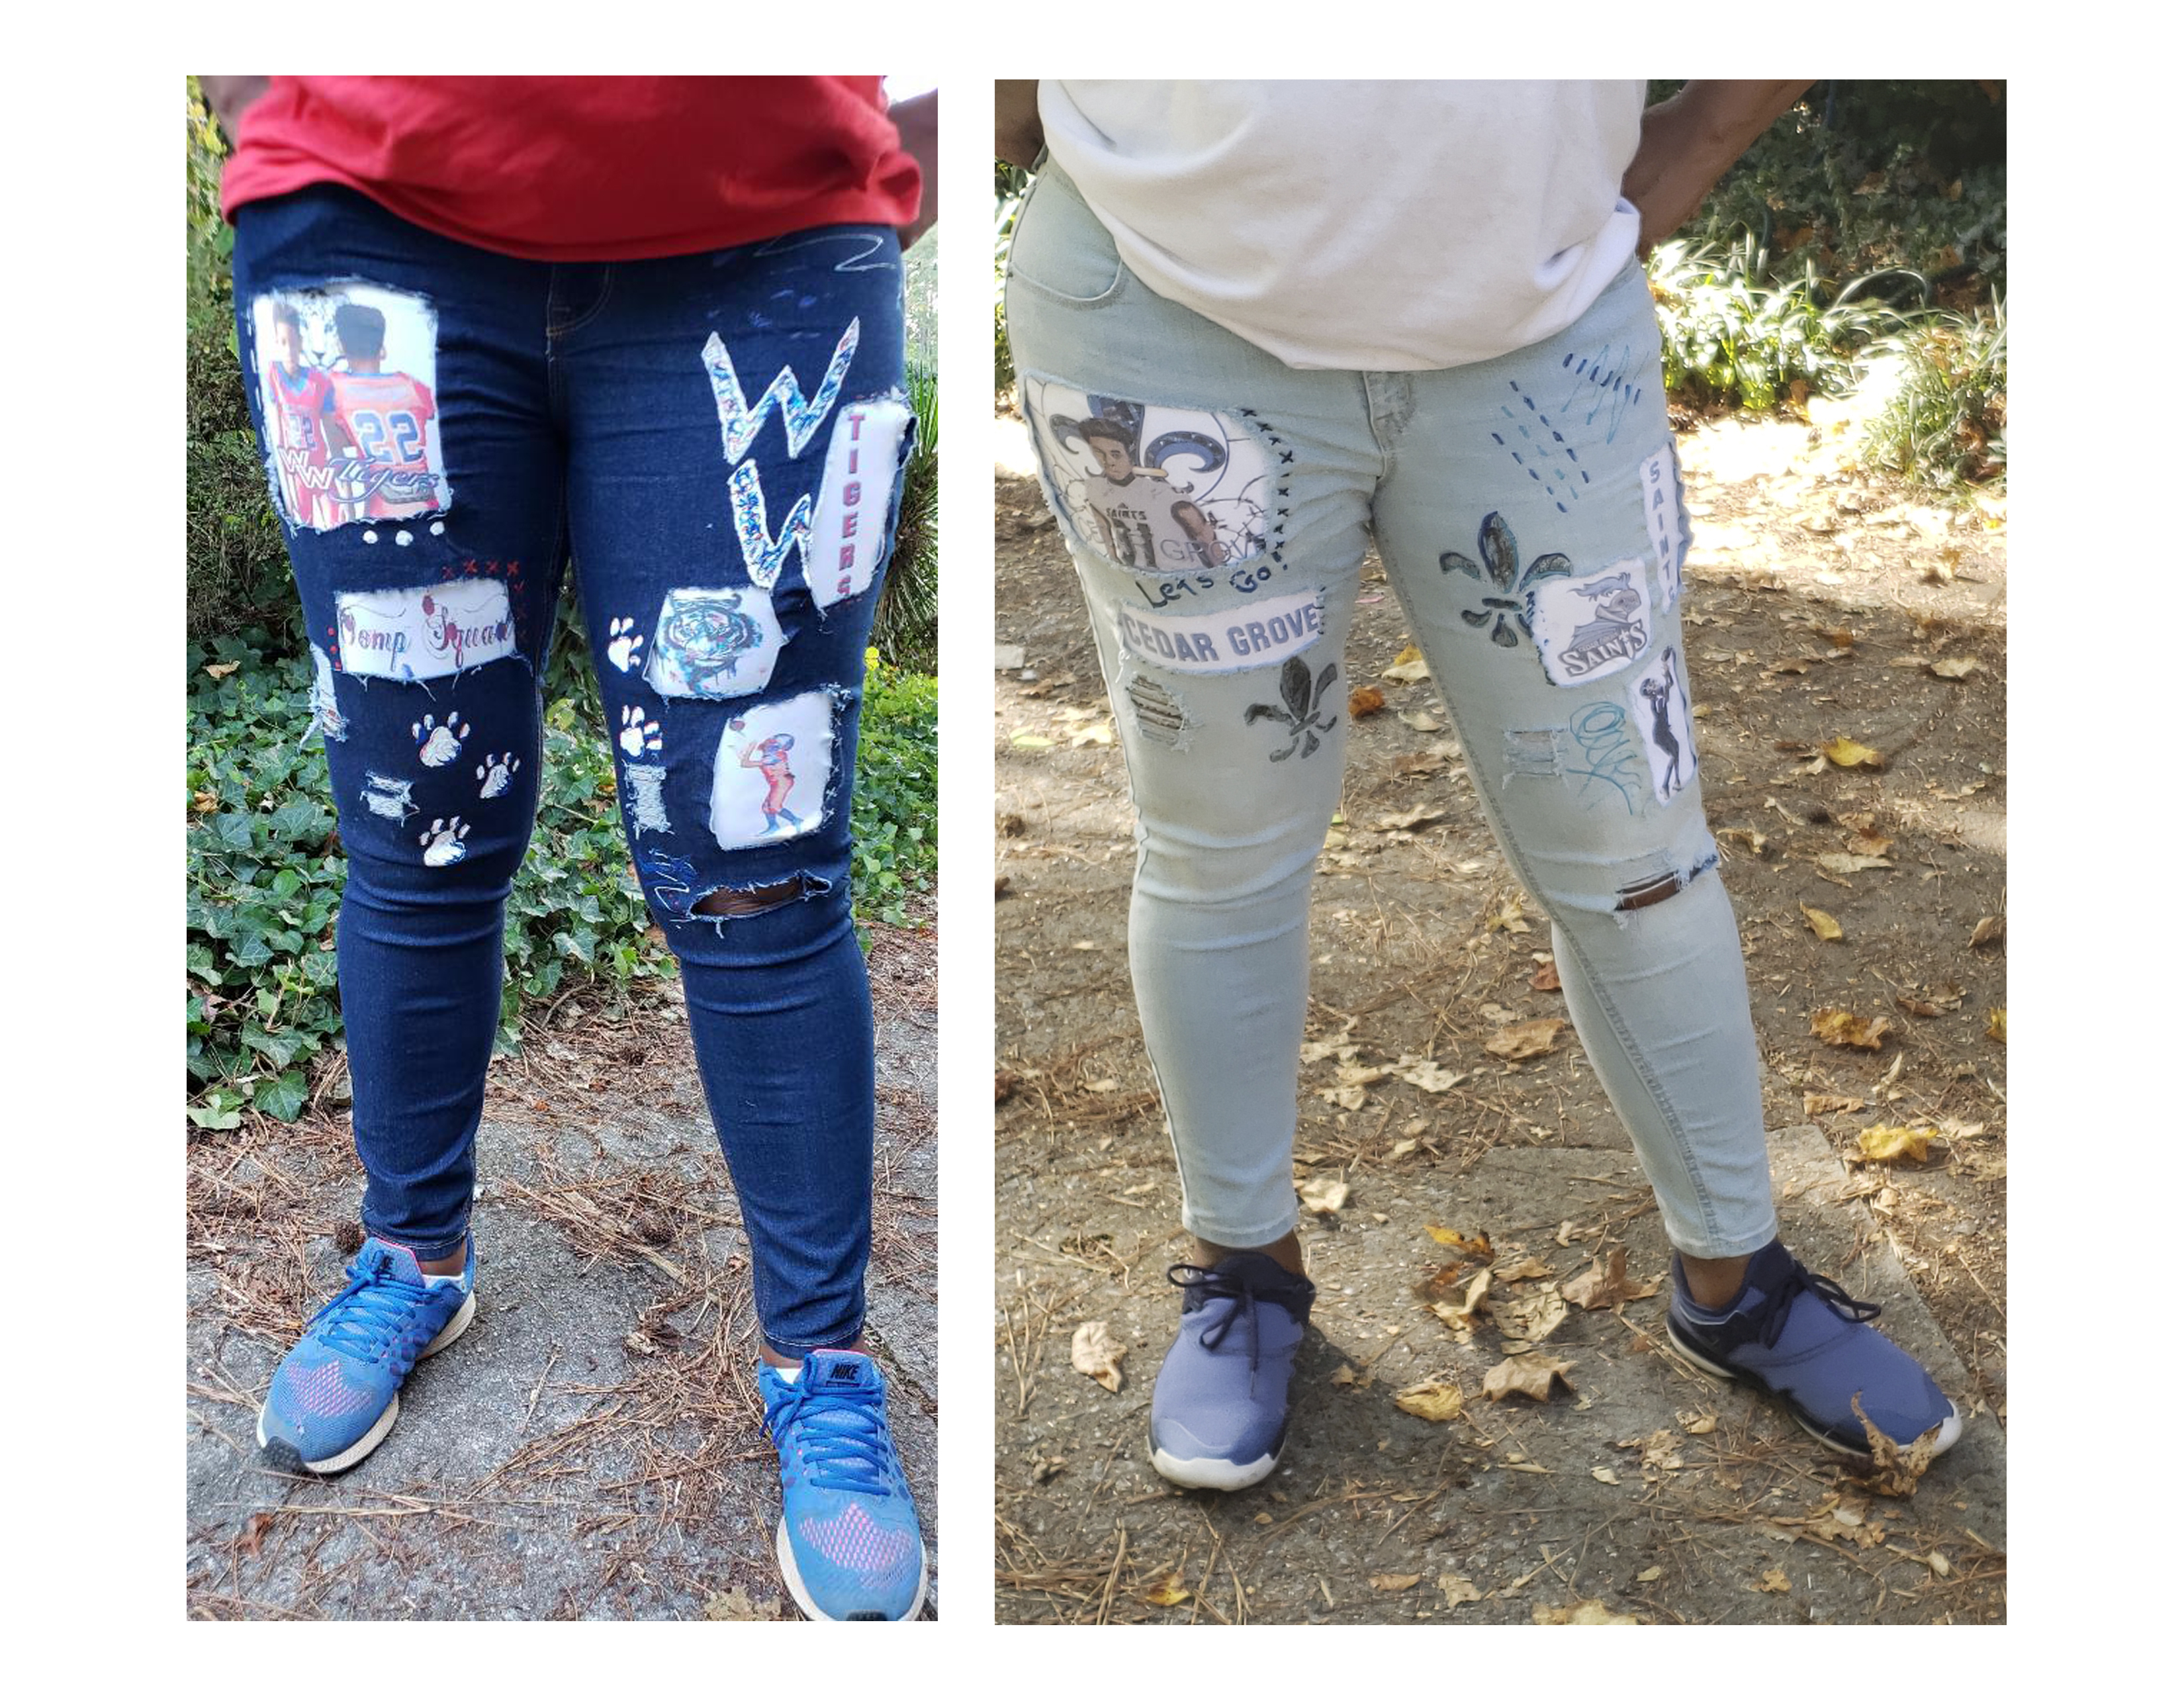 Fanwear Distressed Jeans (Out of the Box Contest) made with sublimation printing